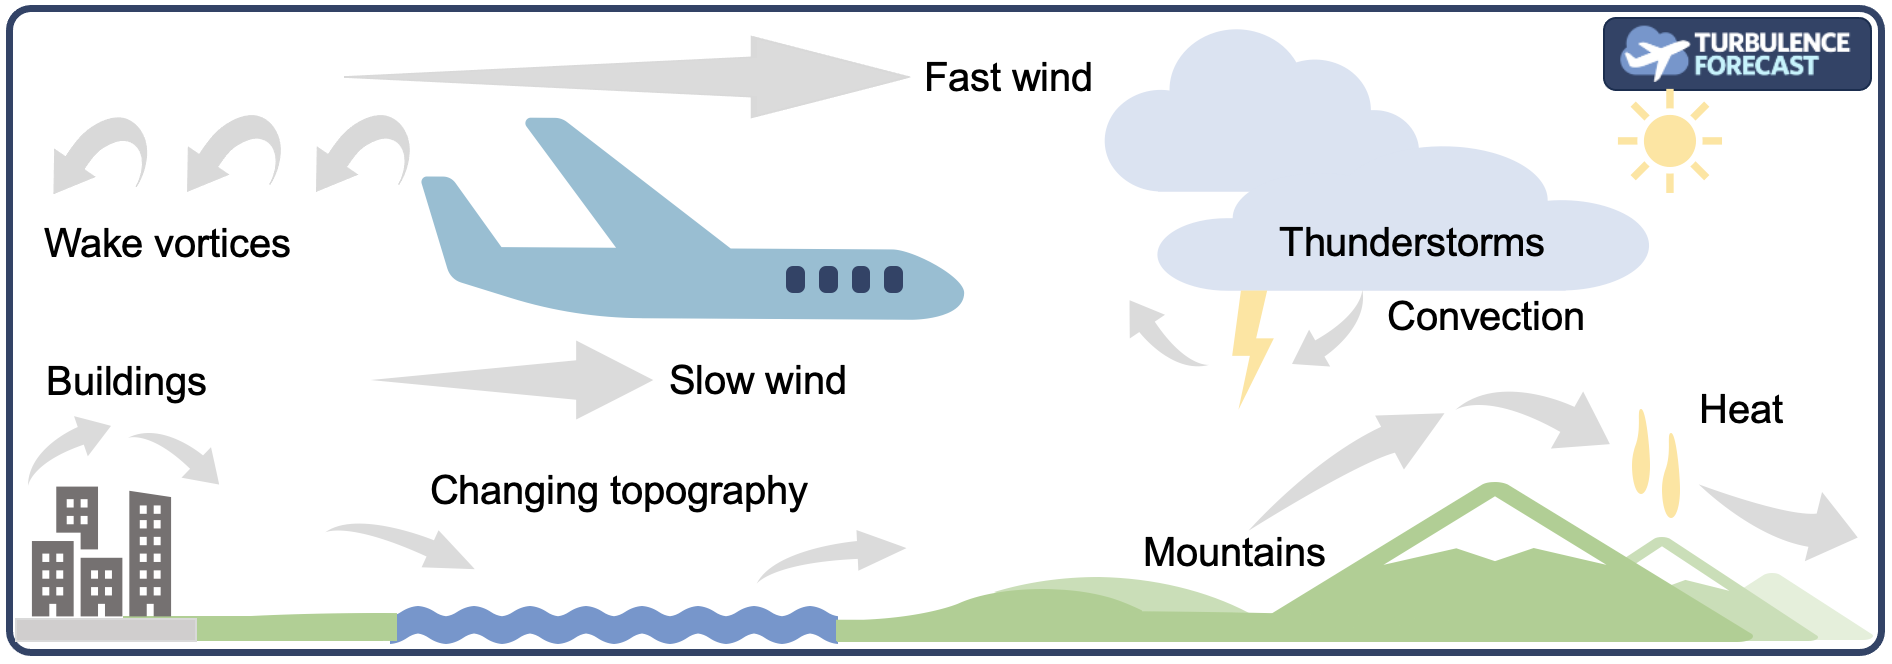 Illustration of different causes of turbulence